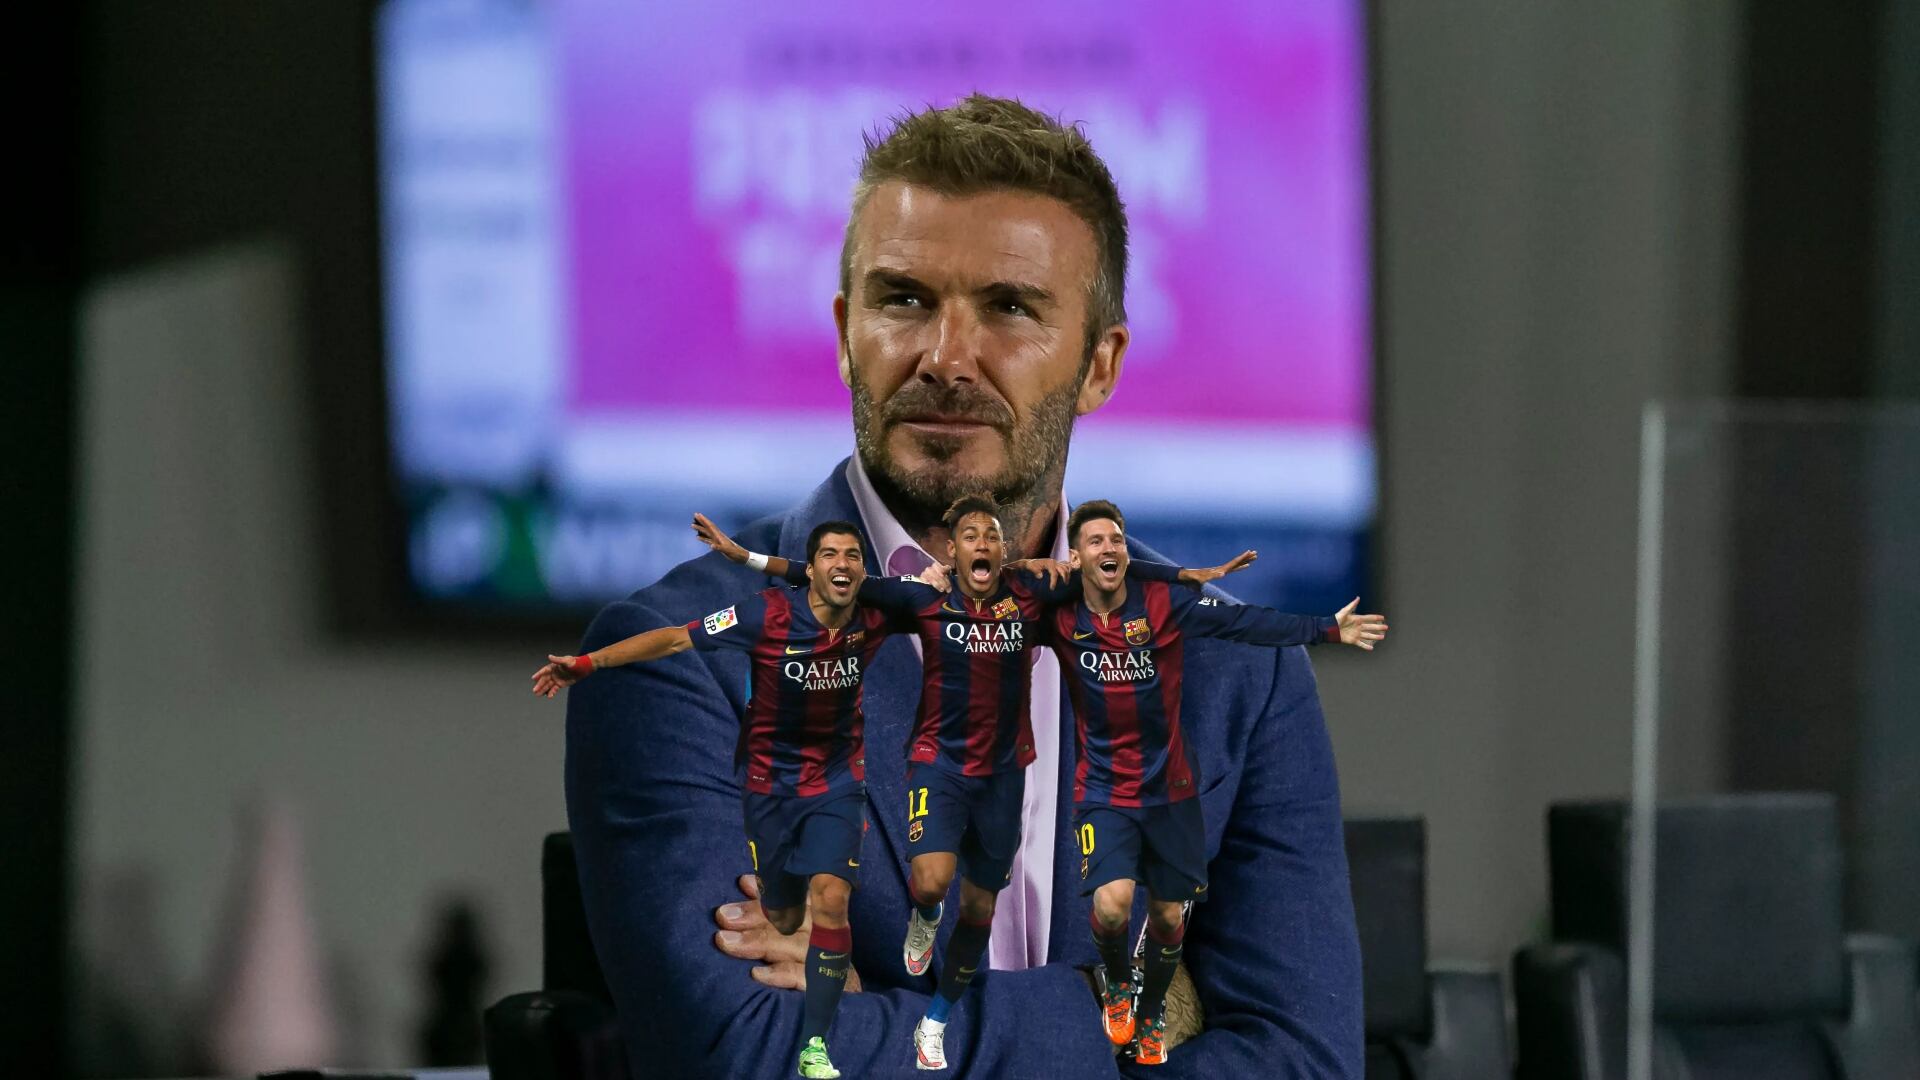 If Beckham wants to bring Neymar for the MSN at Inter Miami, the obstacle he must overcome and it's not about the money